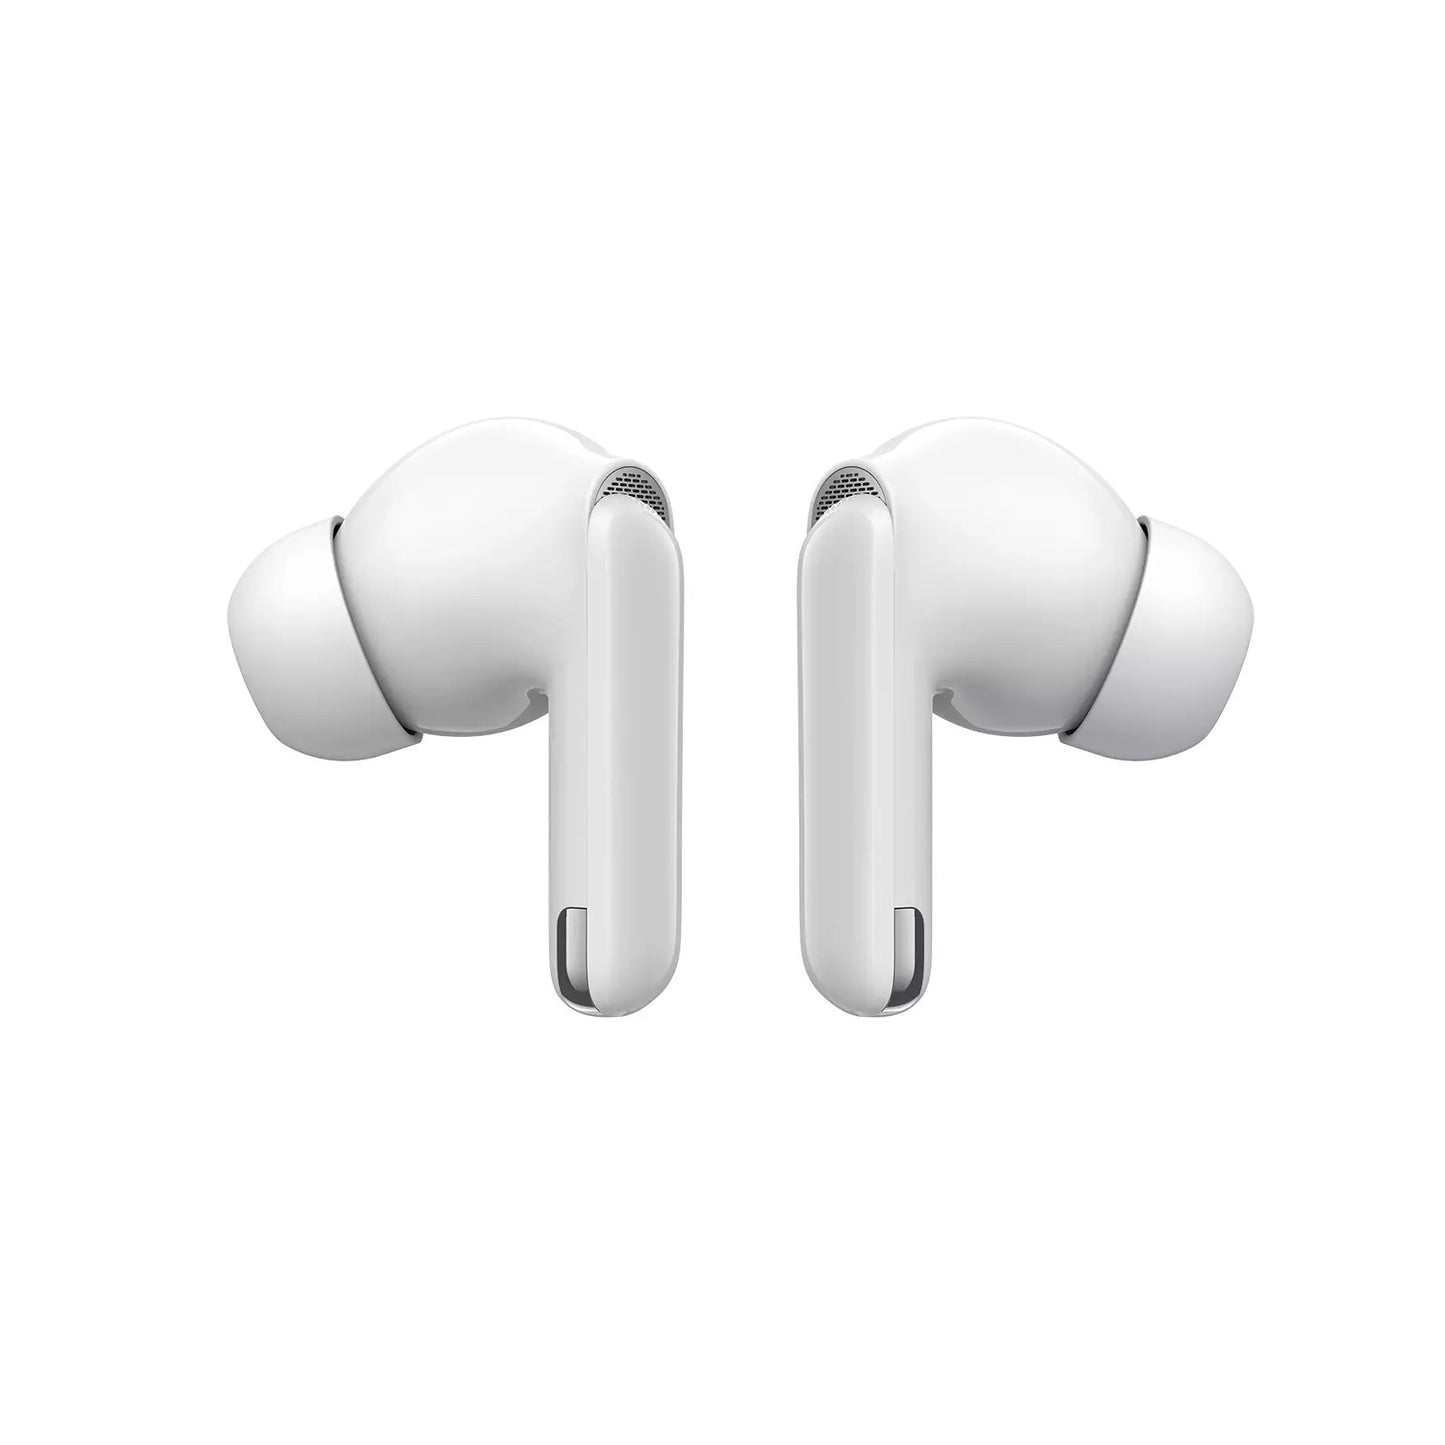 Sounarc Q2 Wireless Bluetooth Earbuds White Color Price in Pakistan